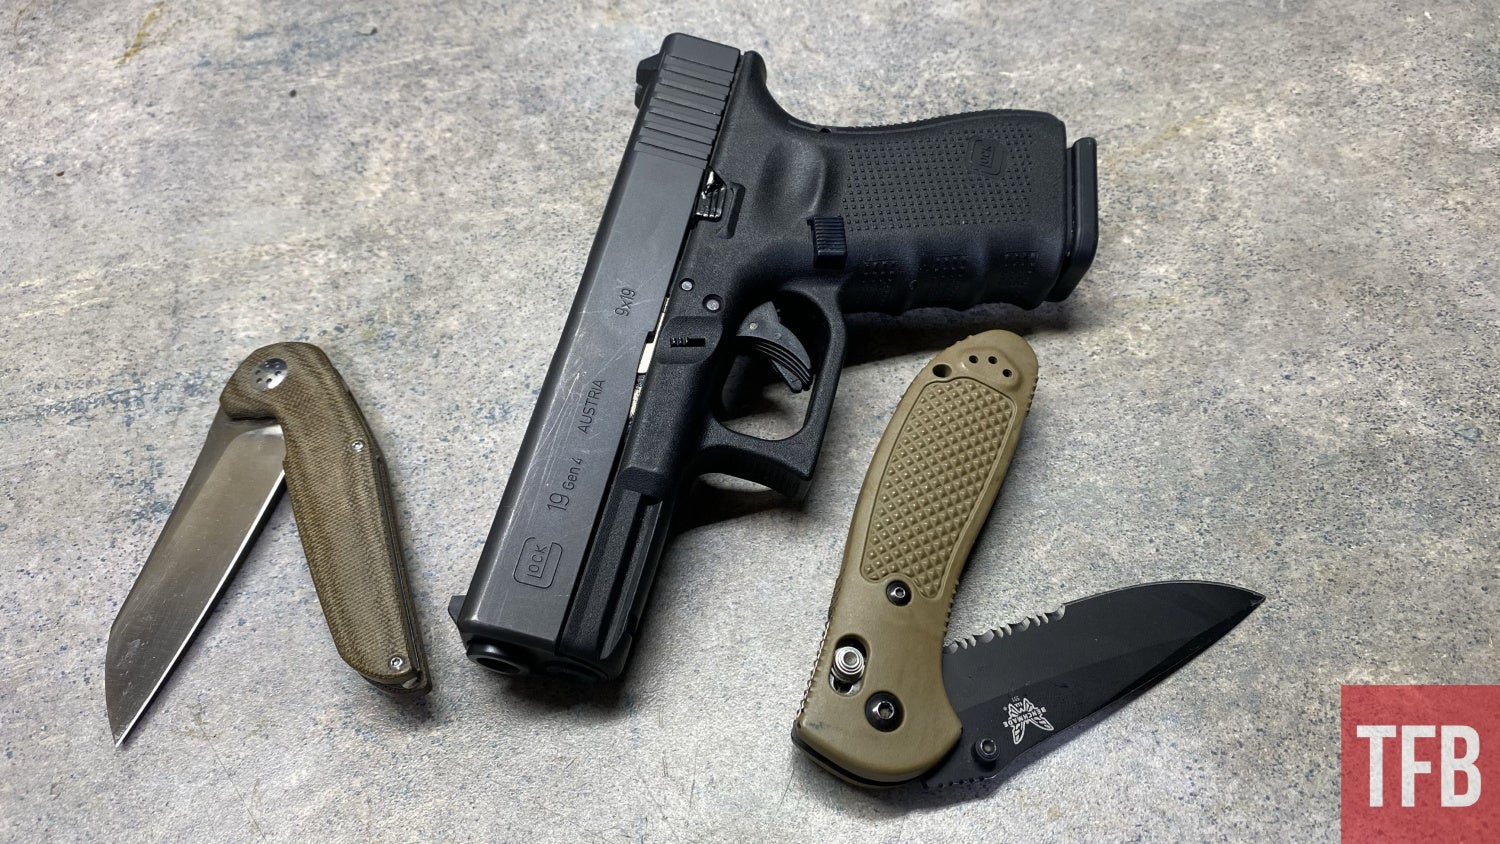 Concealed Carry Corner: Concealed Carry Priorities